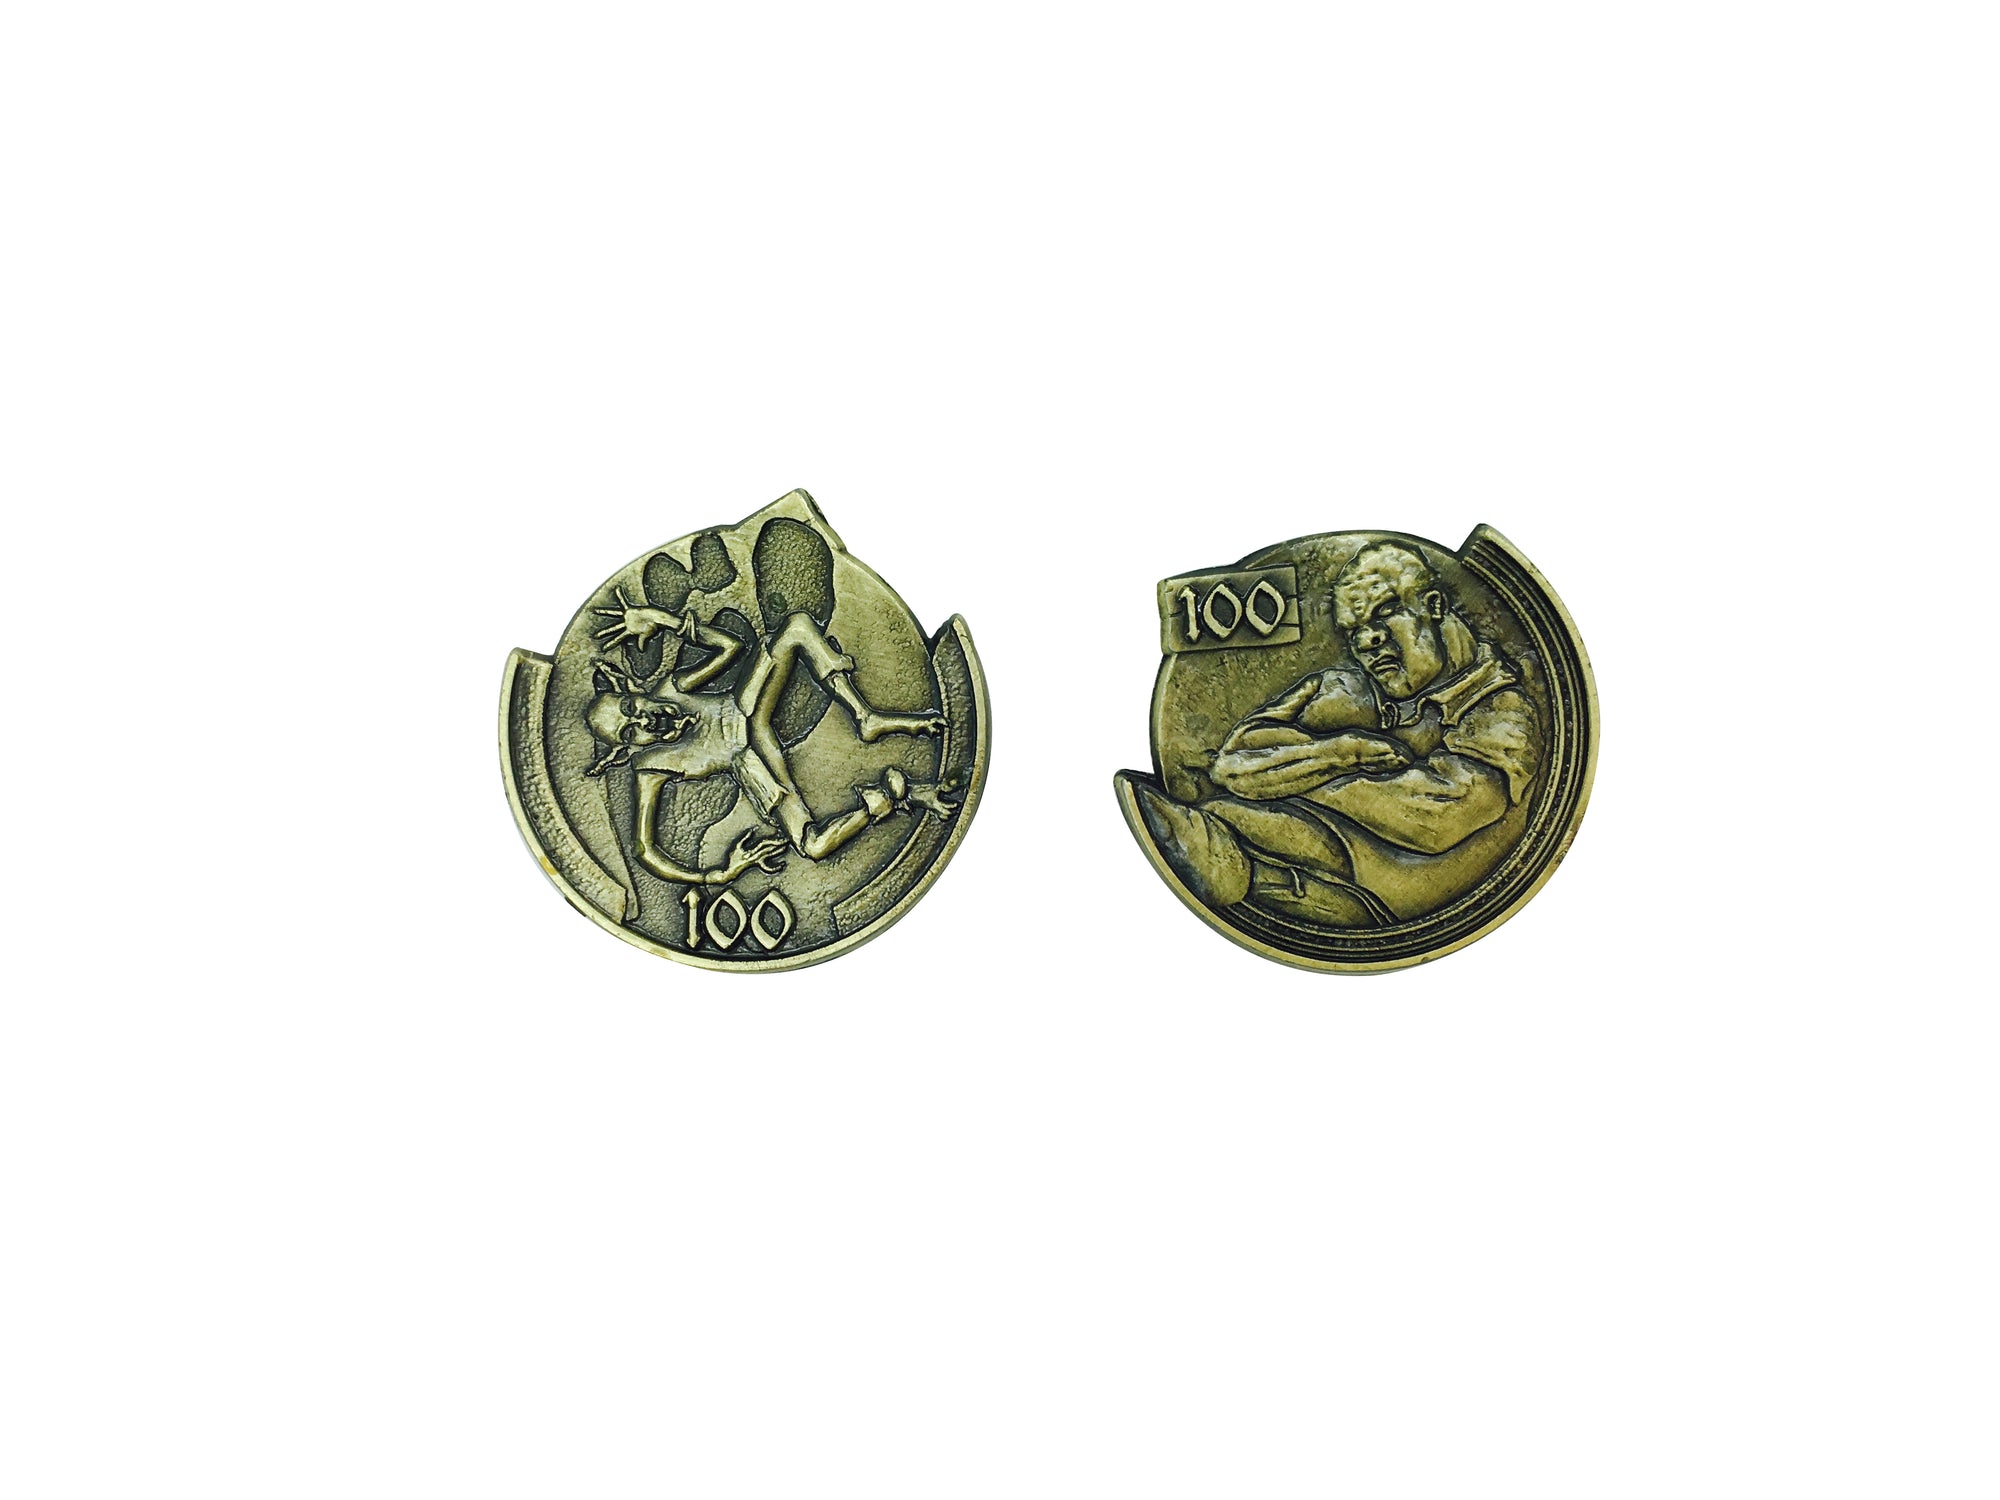 Adventure Coins – Orc and Goblins Metal Coins Set of 10